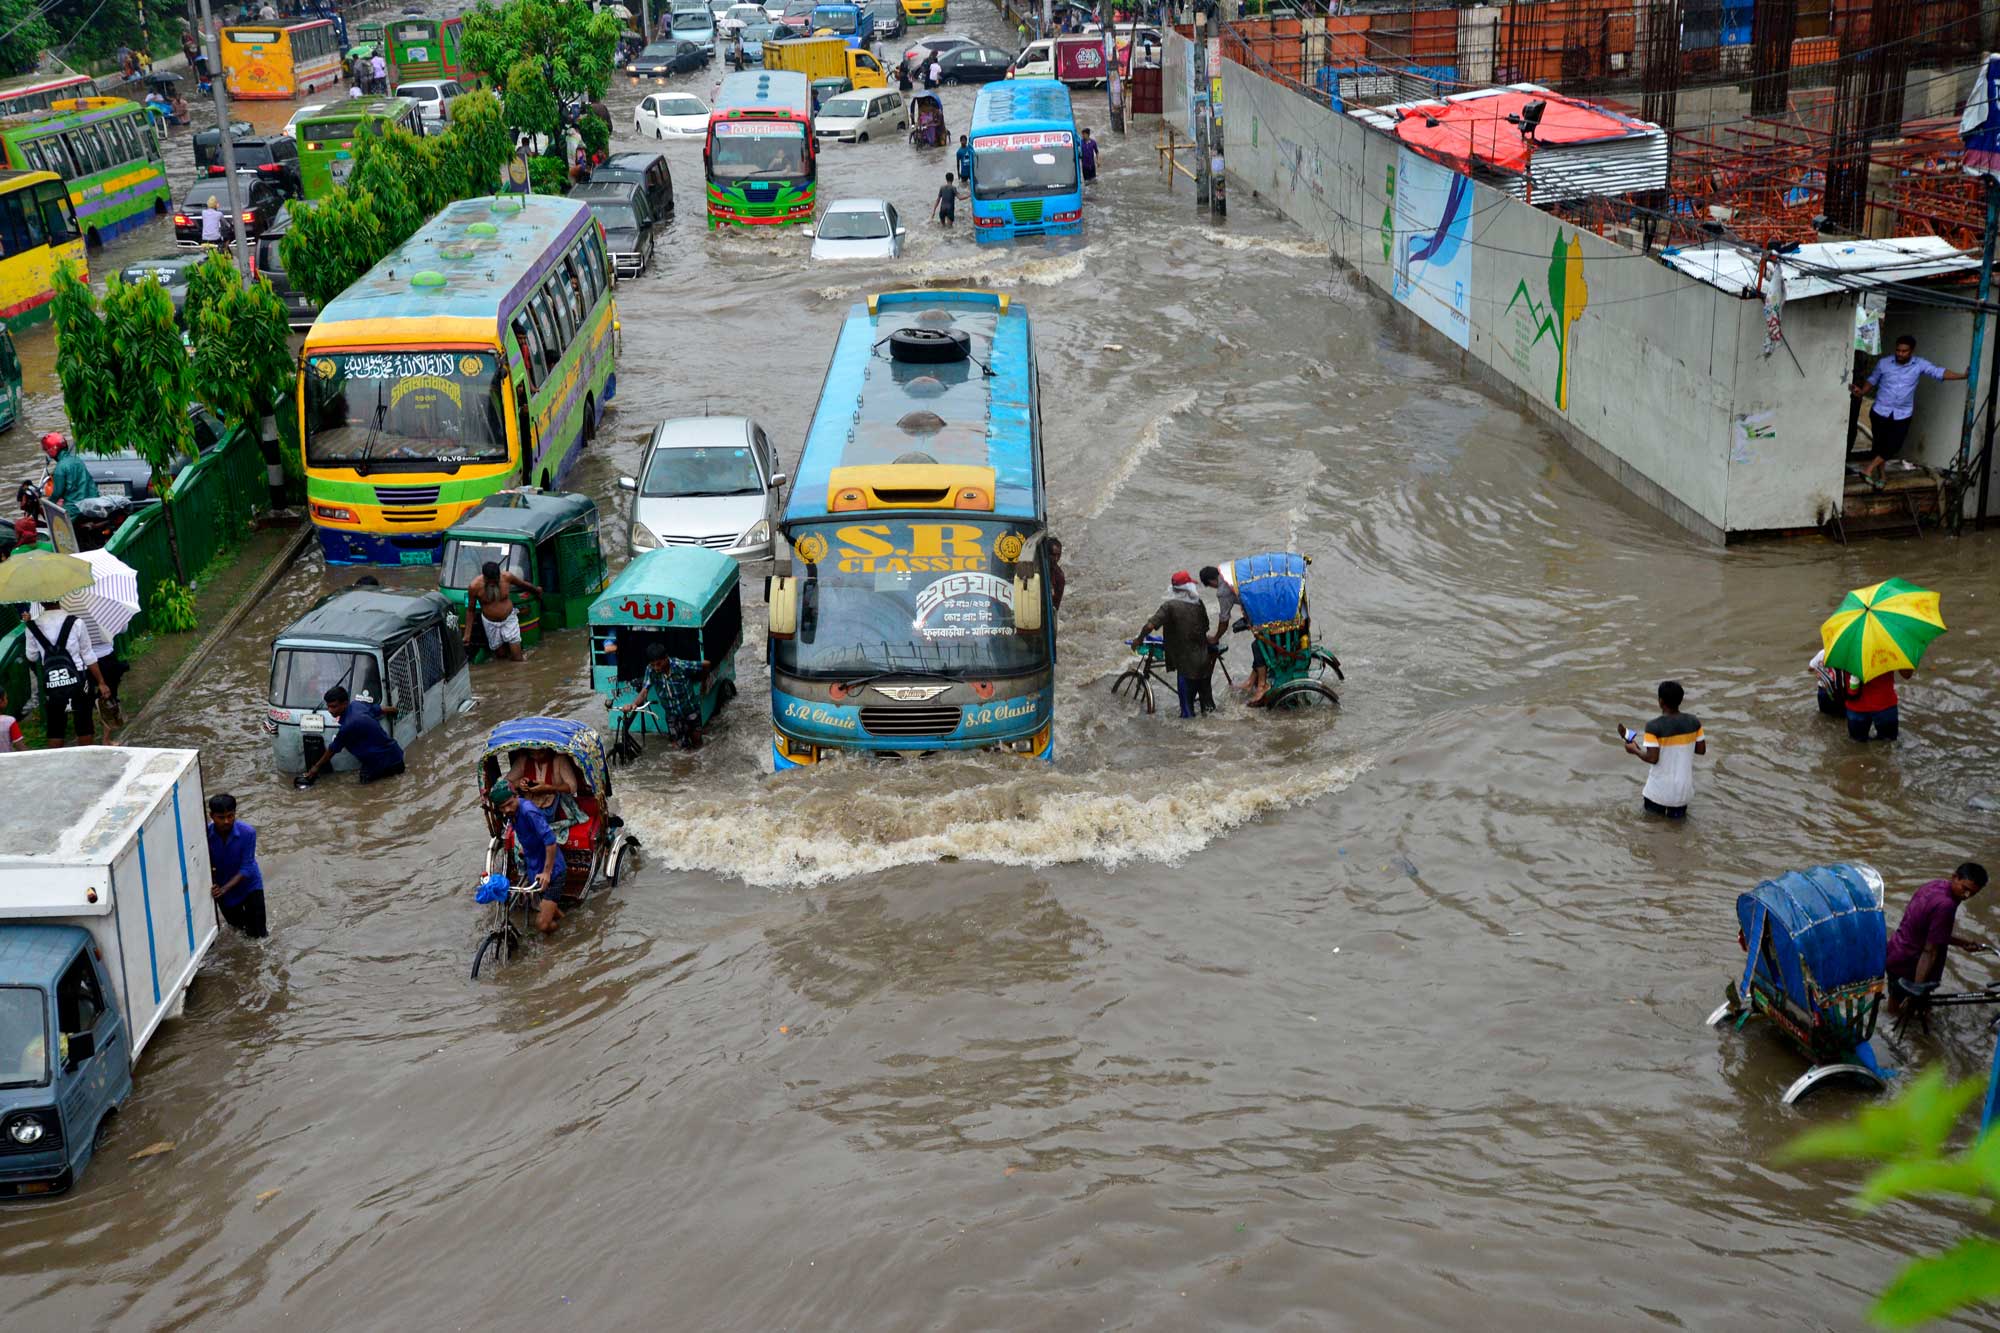 Buses, cars and bicycles attempt to travel on a heavily flooded road, which reaches people's waists.